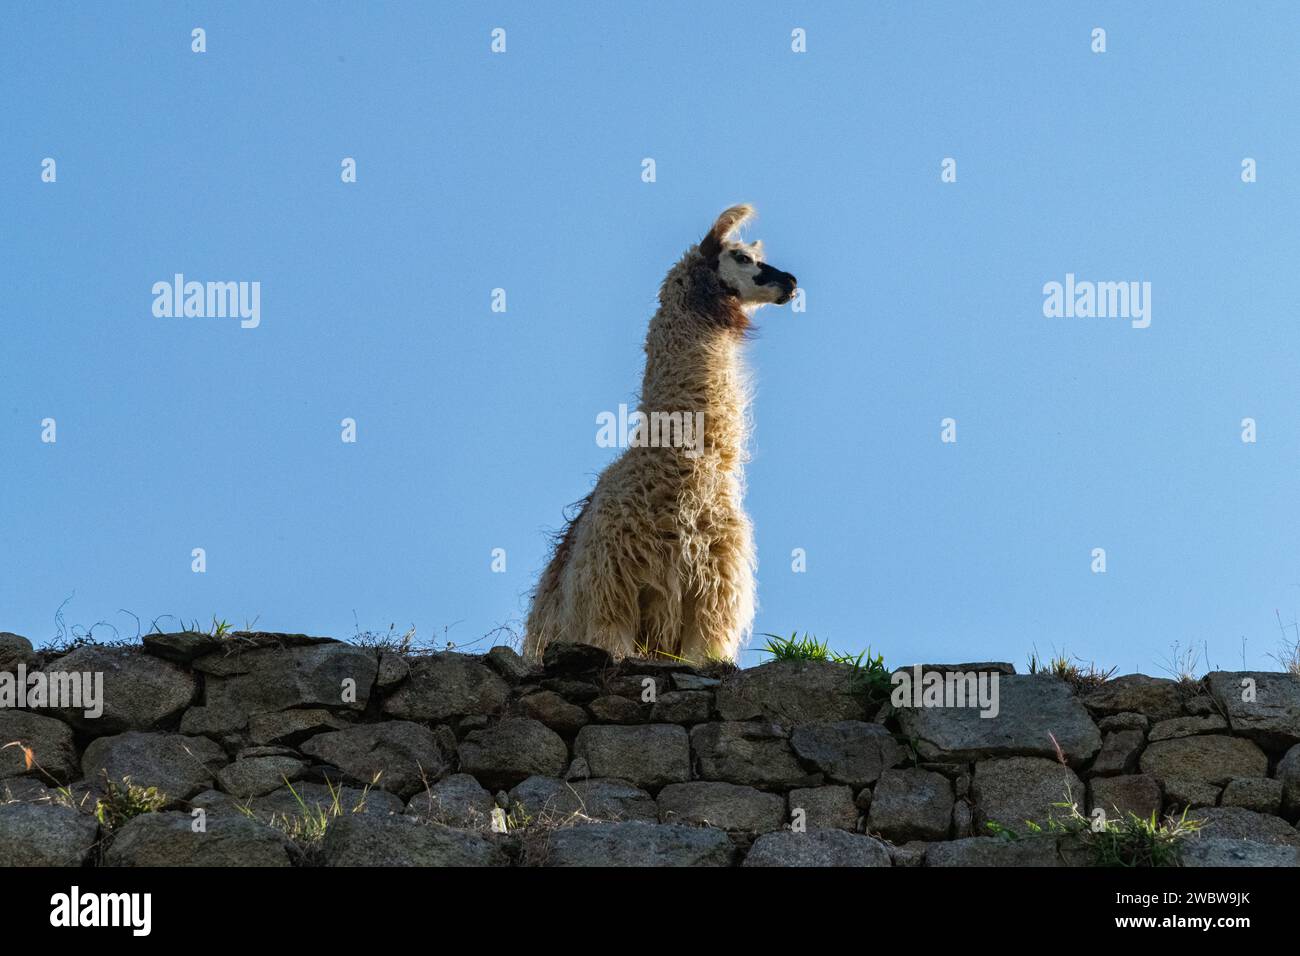 A llama looking out on a terrace at the Machu Picchu citadel ruins in the Sacred Valley in Peru Stock Photo